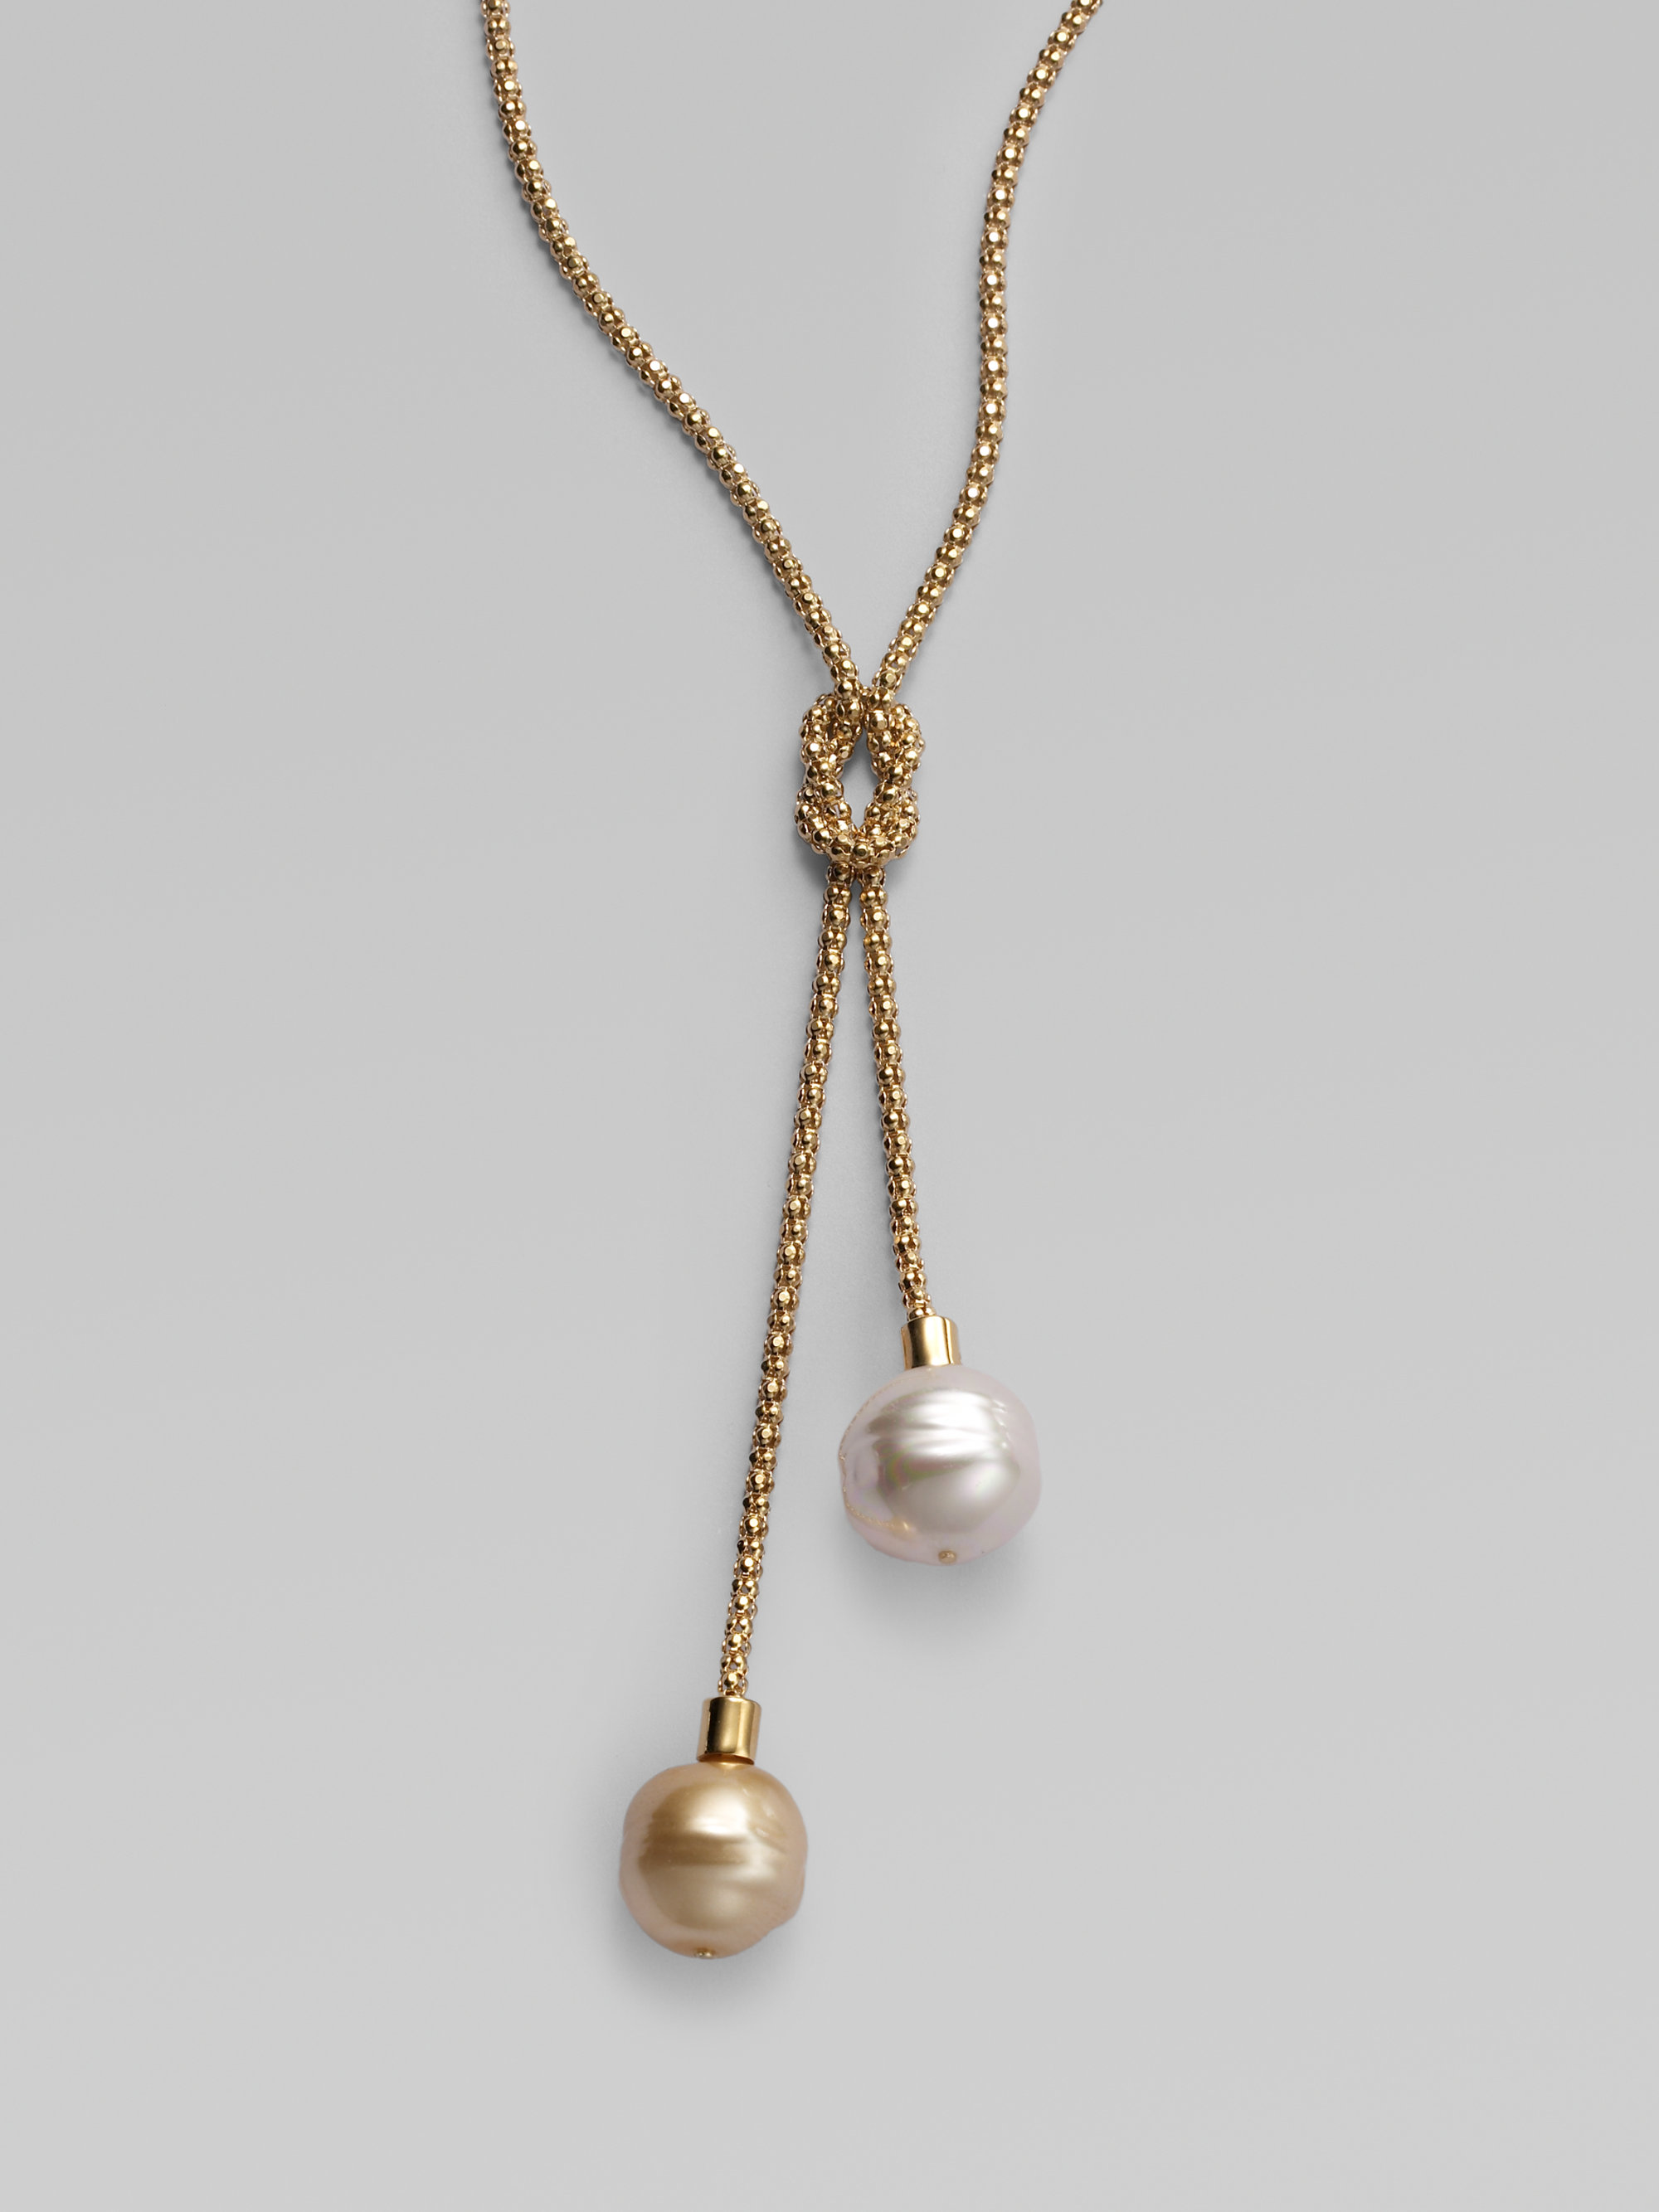 Majorica 14mm White and Champagne Baroque Pearl Lariat Necklace in Gold ...